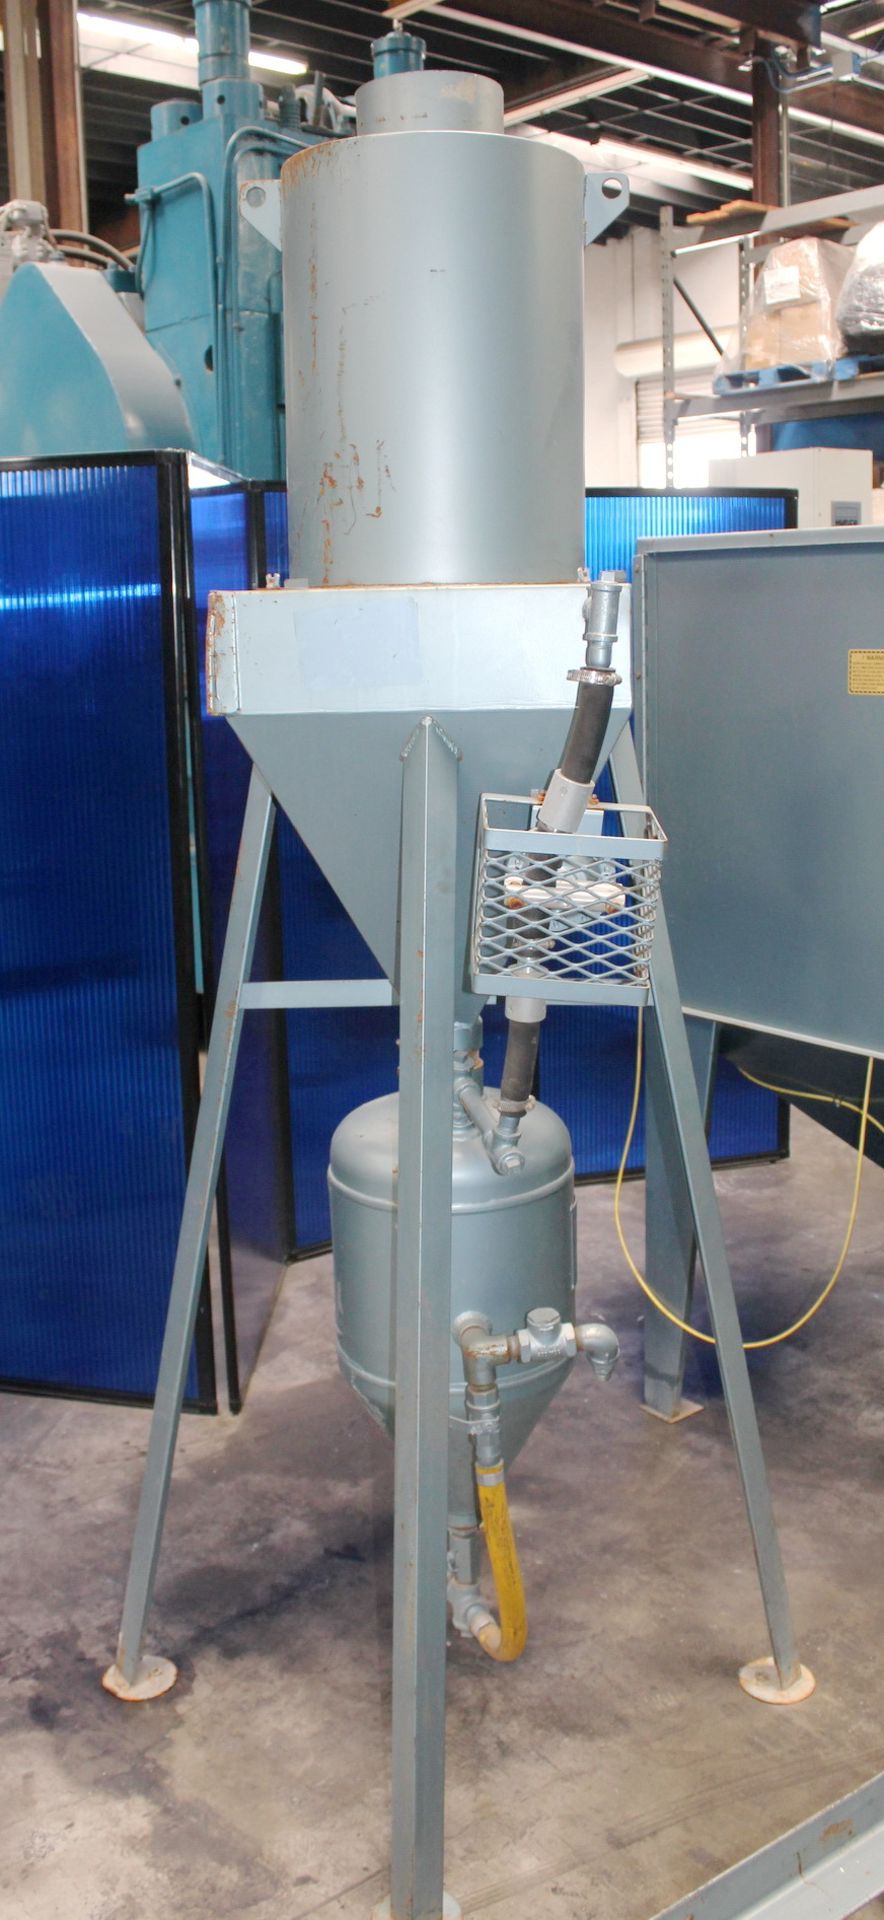 Universal Suction Type Blast Cabinet & Dust Collector | 60" x 48" x 36", Mdl: 60x48x36PDH-DC200, S/ - Image 11 of 20